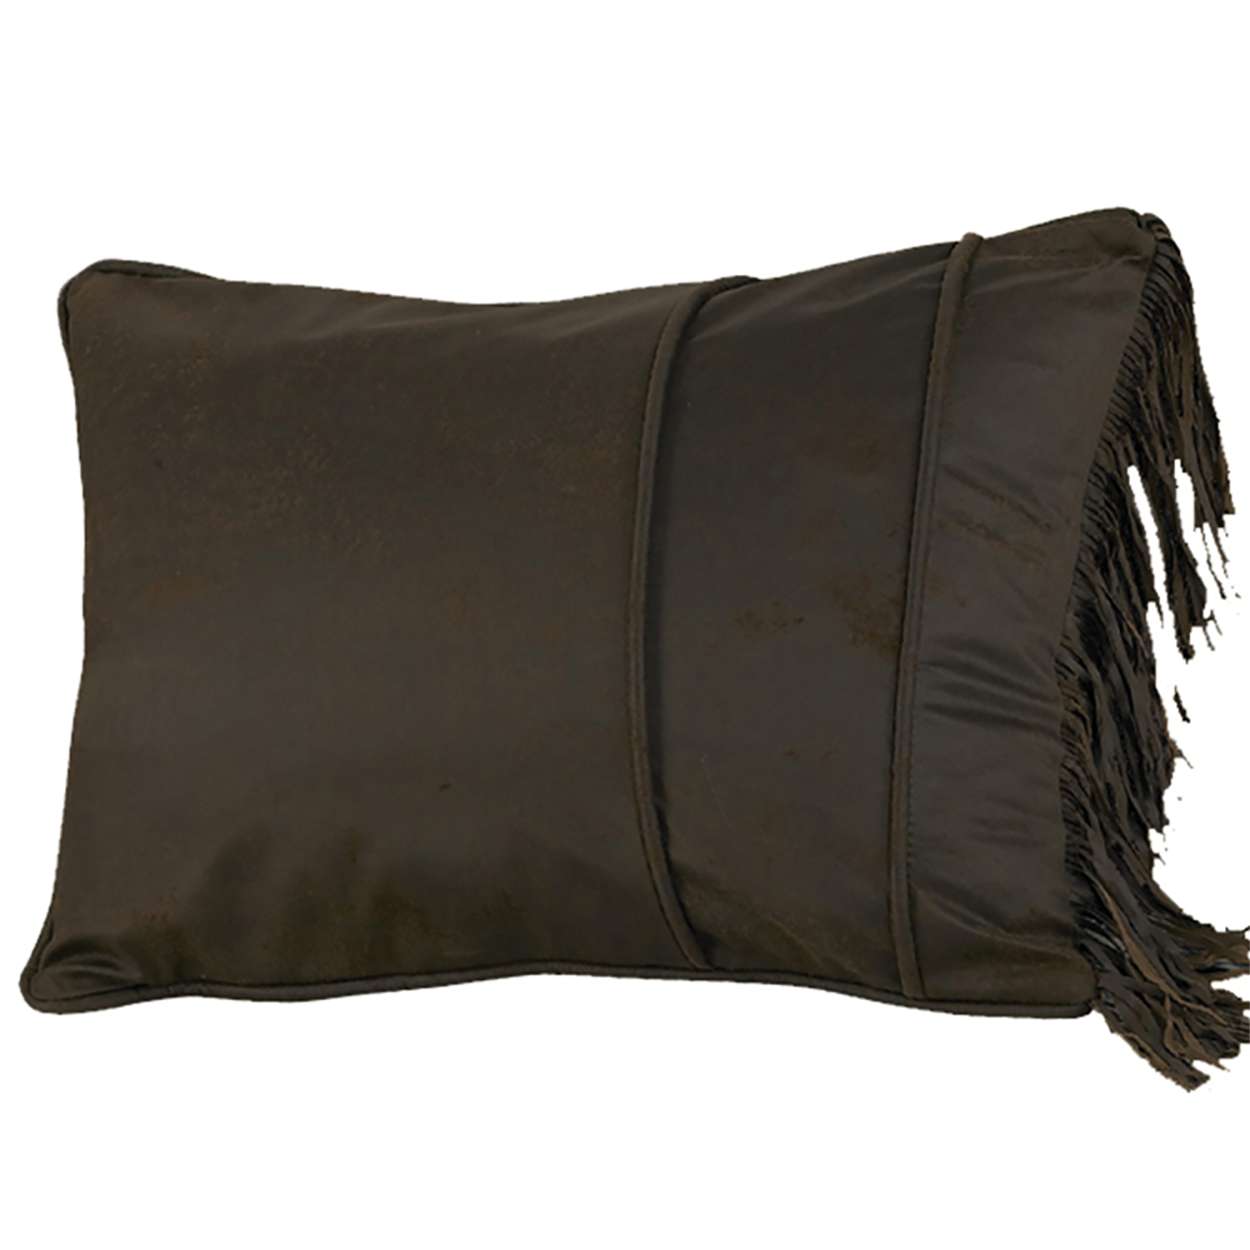 PS1002-Q Pillow Sham Faux Leather with Fringe Queen